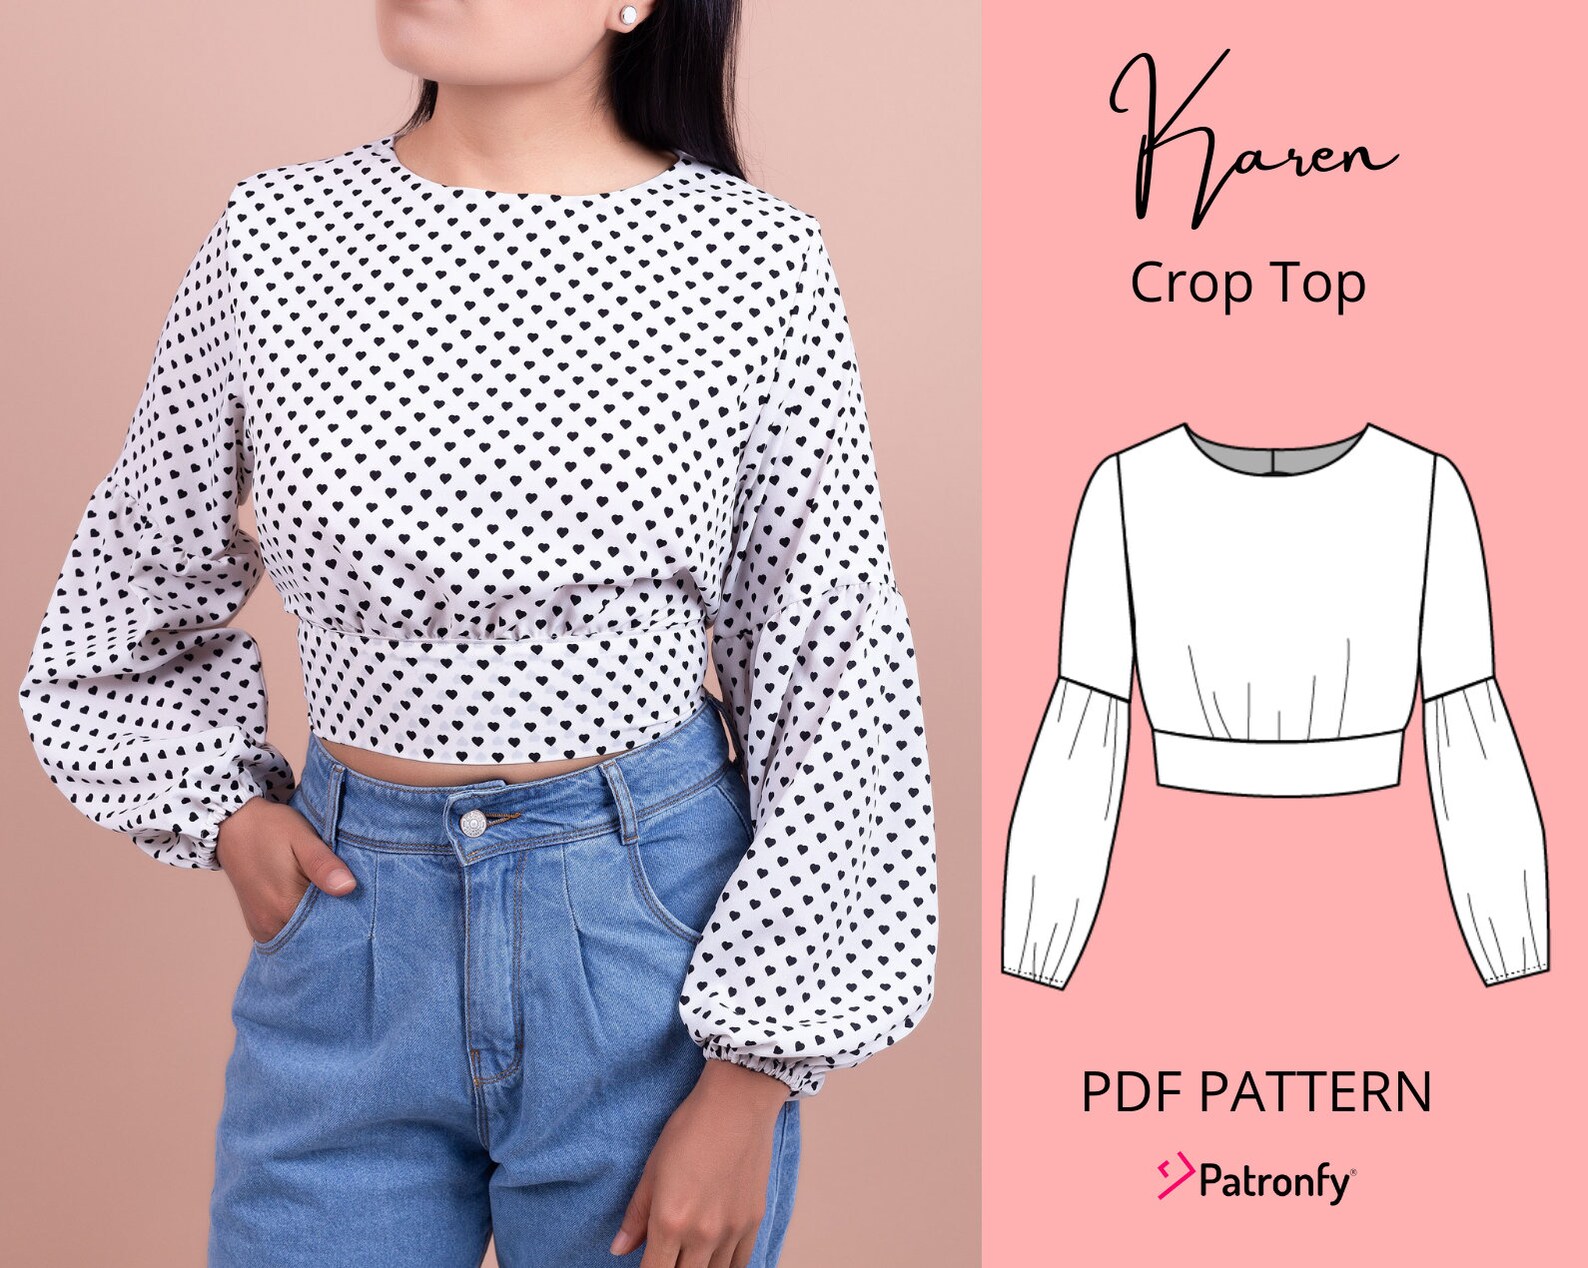 Karen Blouse With Open Back and Back Tie PDF Sewing Pattern - Etsy